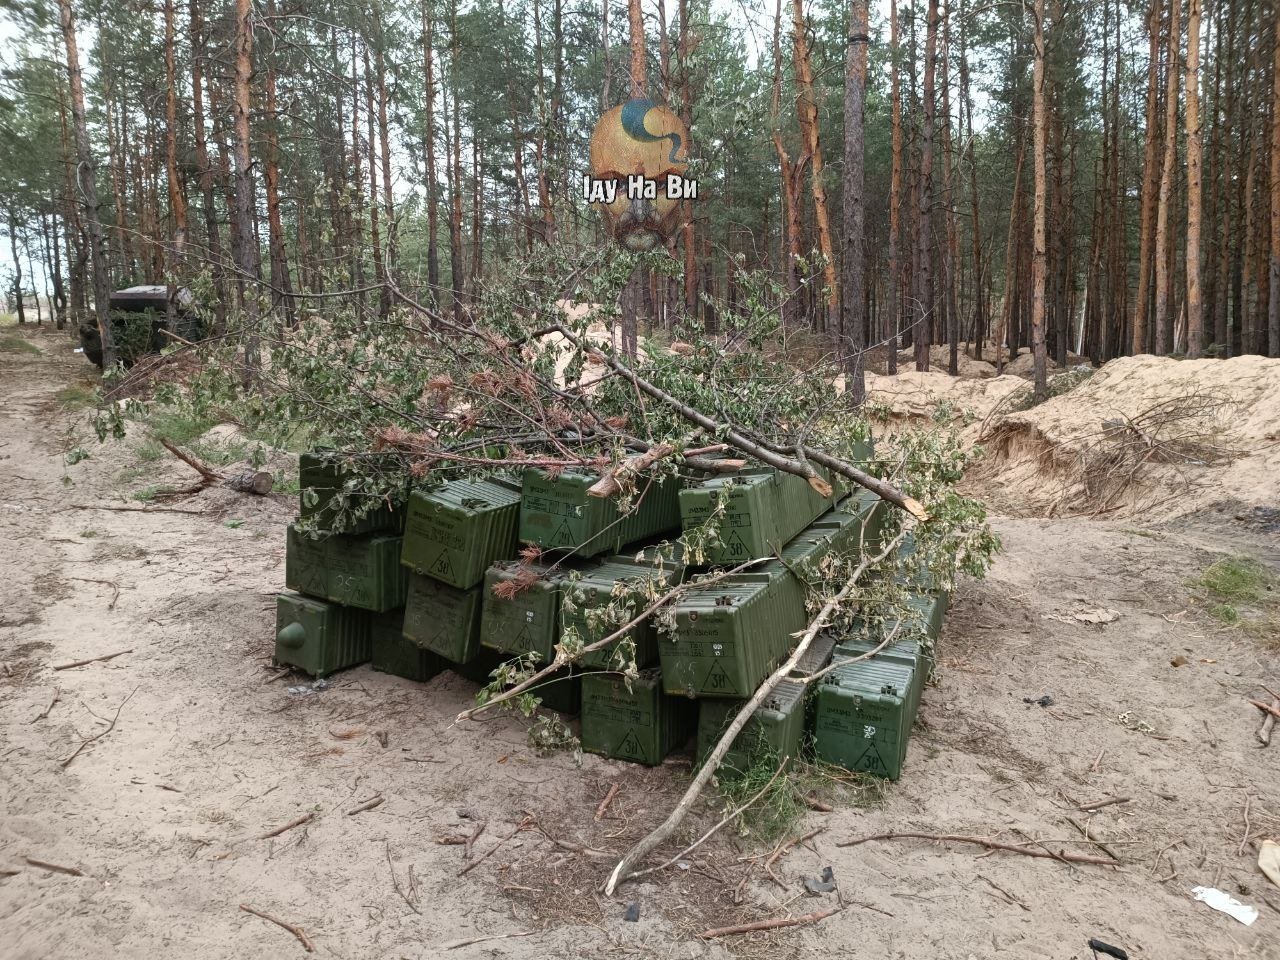 A Russian 9T217 transloader for the 9K33 Osa SAM system along with 17 9M33M3 surface-to-air missiles were captured by the Ukrainian army in Kharkiv Oblast , Defense Express